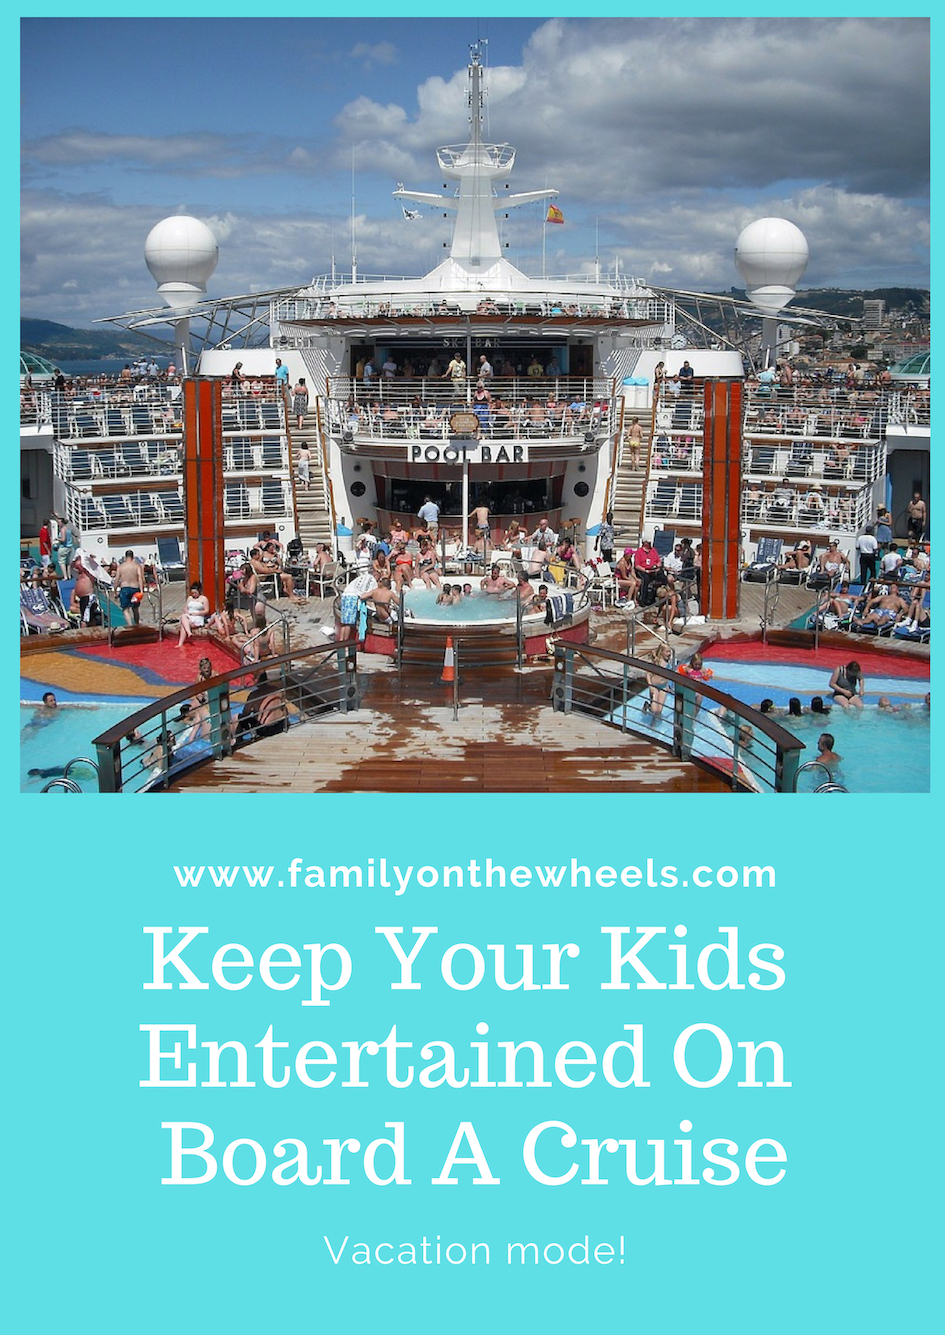 Planning a Cruise vacation with your family and kids? Here are some some useful tips on keeping your kids entertained on their very first cruise holiday. #cruse #holiday #familytrip #vacations #sumemrholidays #schoolbreak #travelwithkids